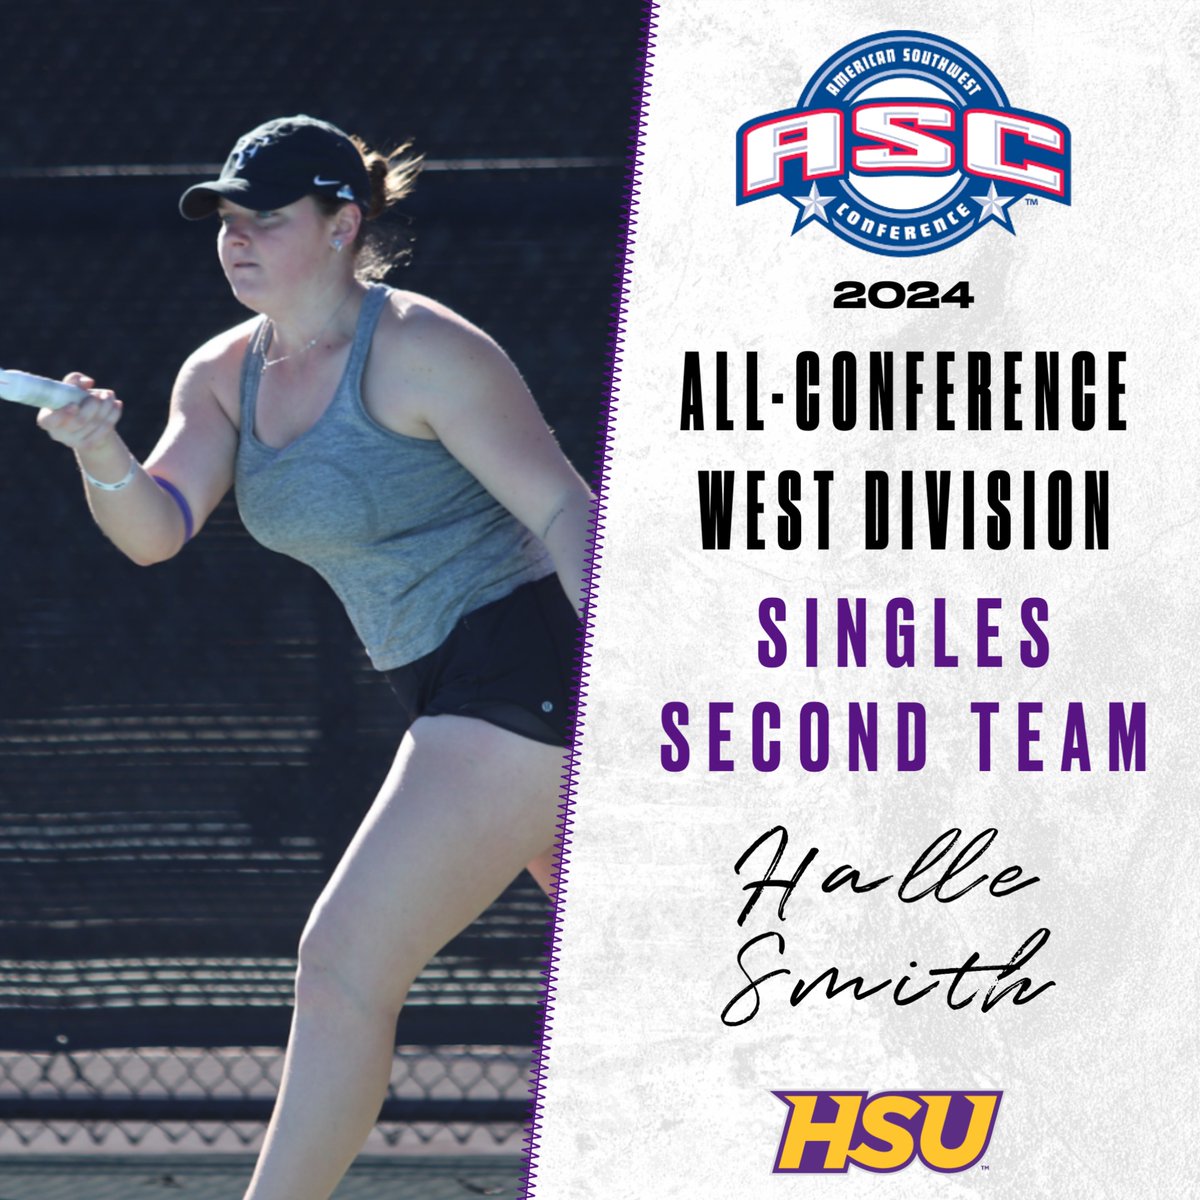 Congrats to Halle Smith for being named to the ASC West Singles Second Team 🤠